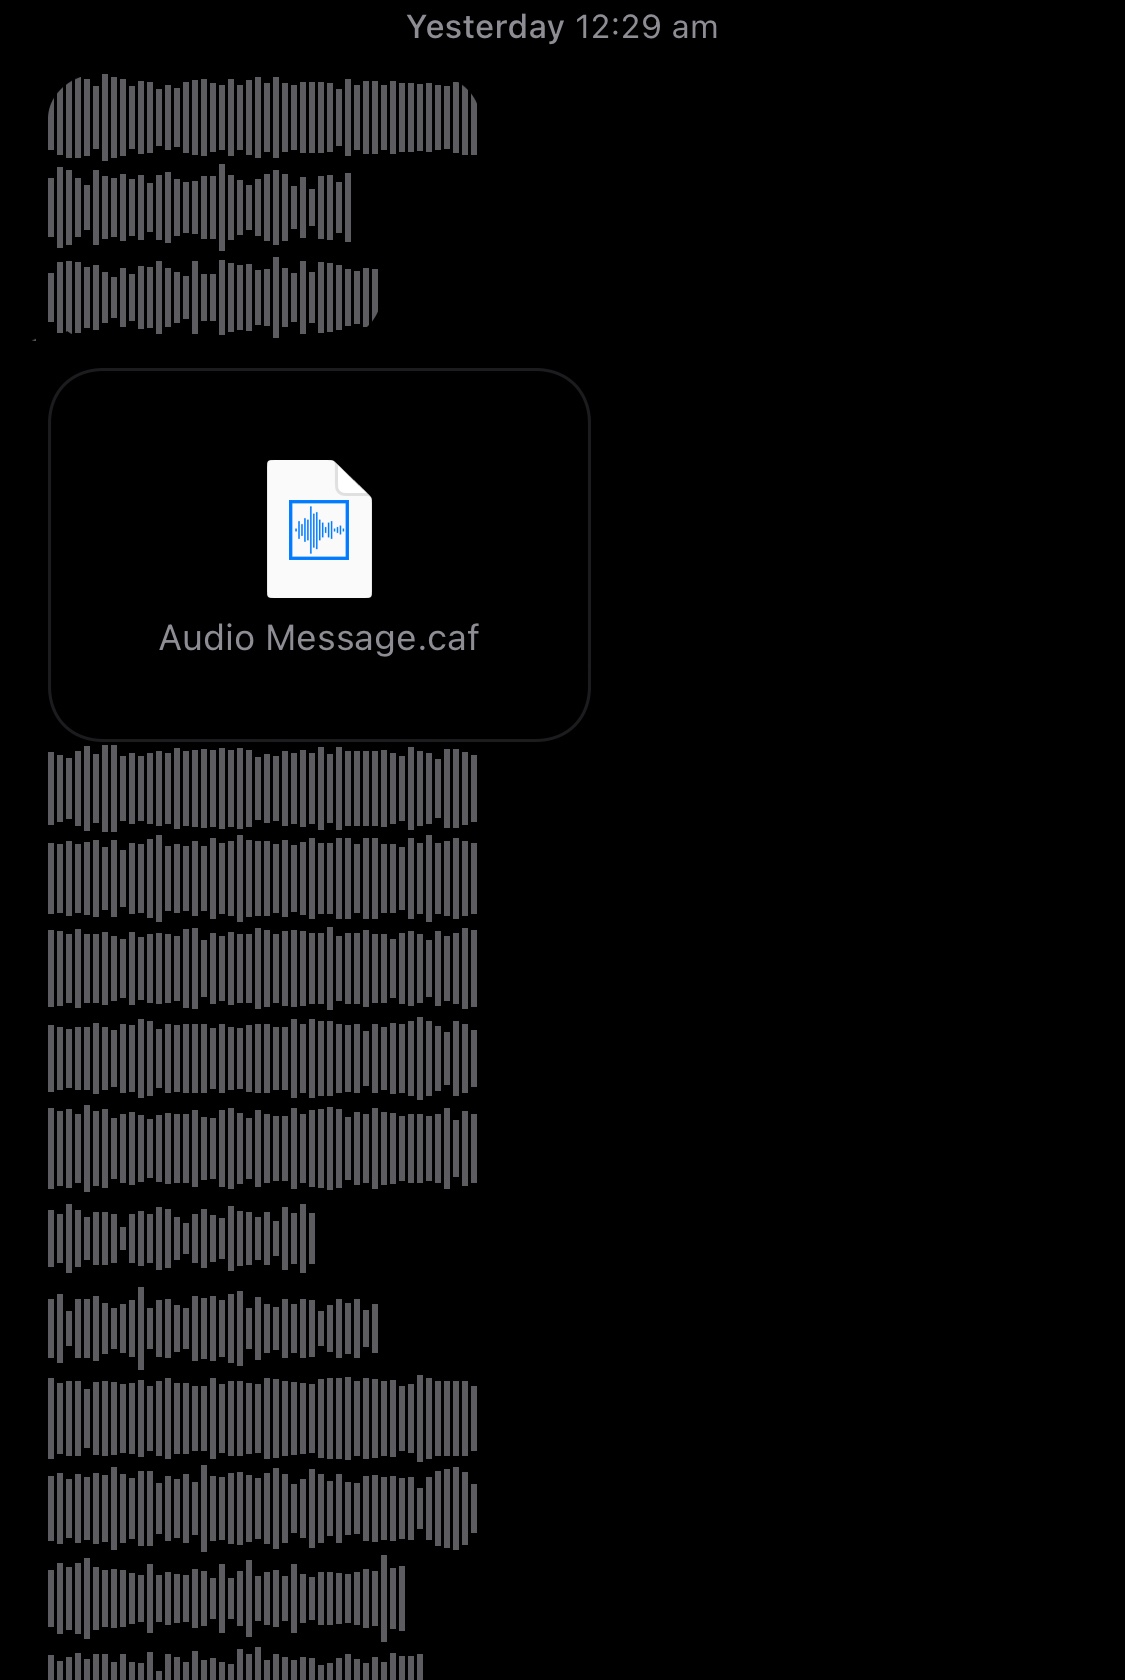 Audio imessages are greyed out Apple Community